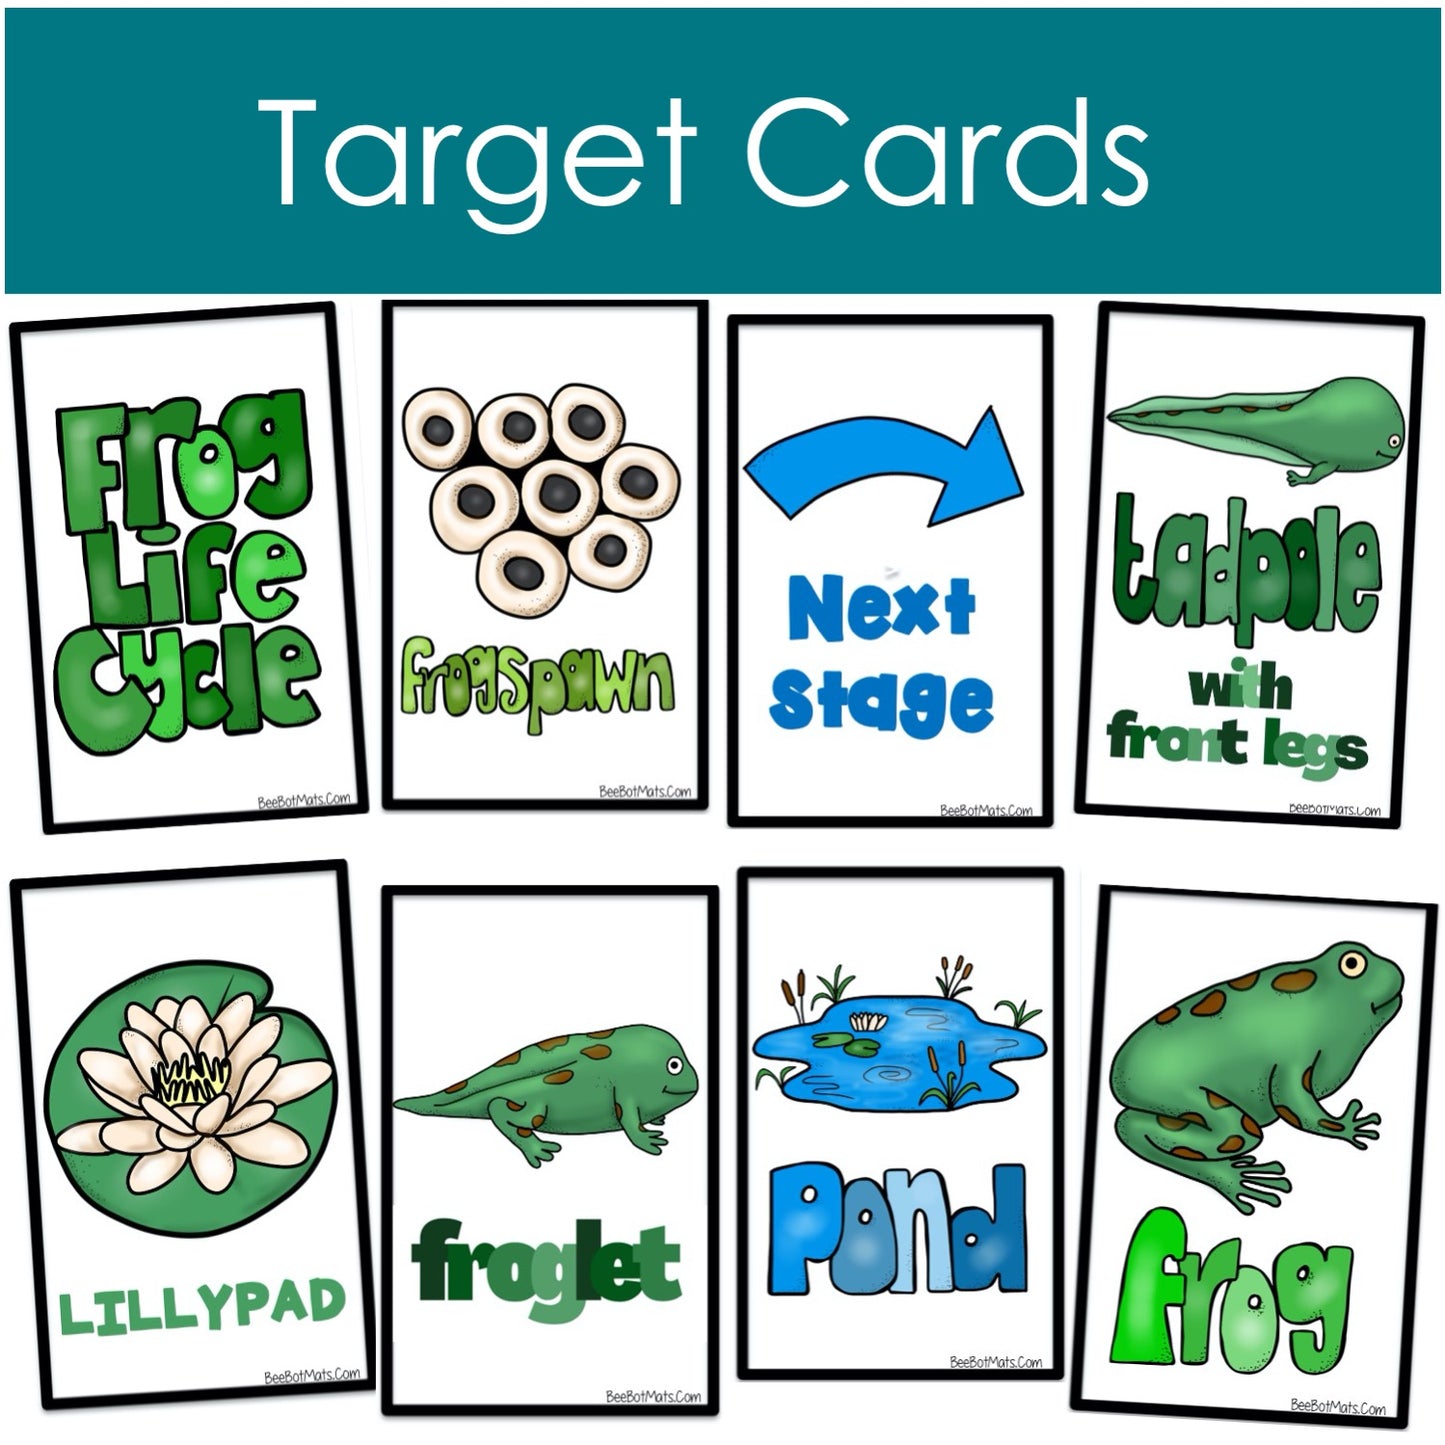 BeeBot Life Cycle of the Frog target cards